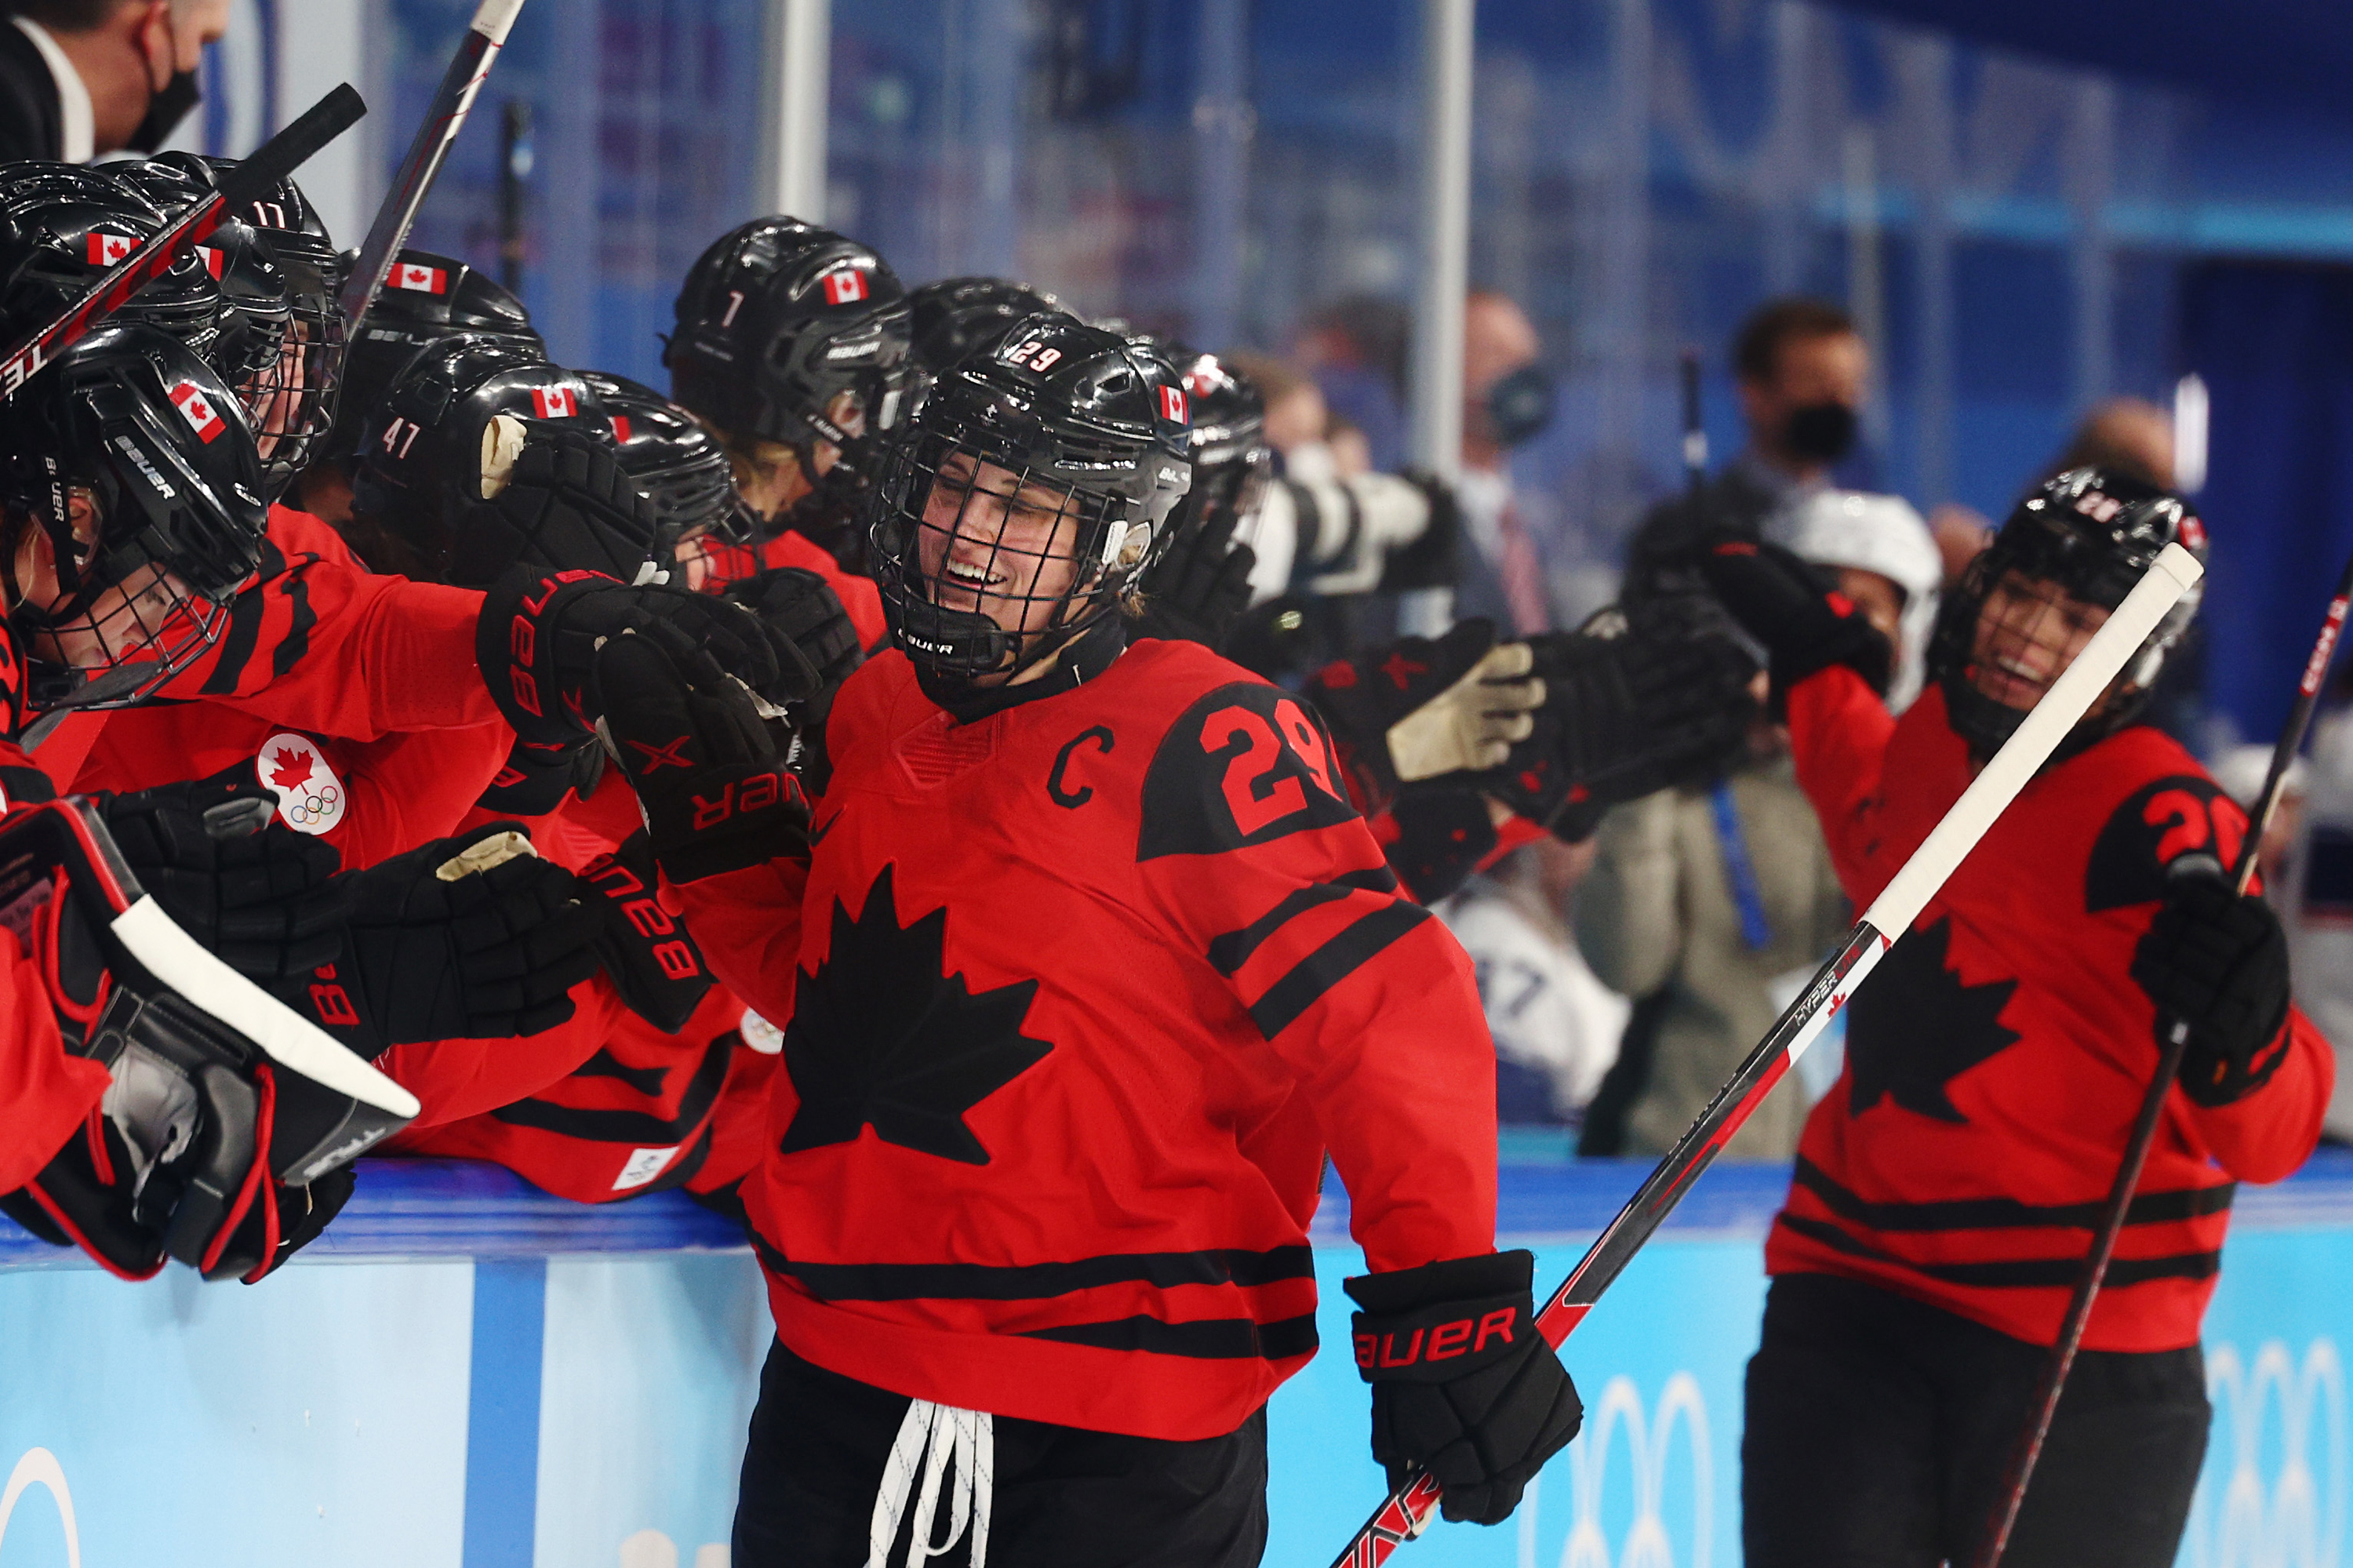 Team Canada's Marie-Philip Poulin #29 celebrates with teammates on the bench after scoring a goal in the first period during the women's ice hockey gold medal match between Team Canada and Team USA on Thursday.